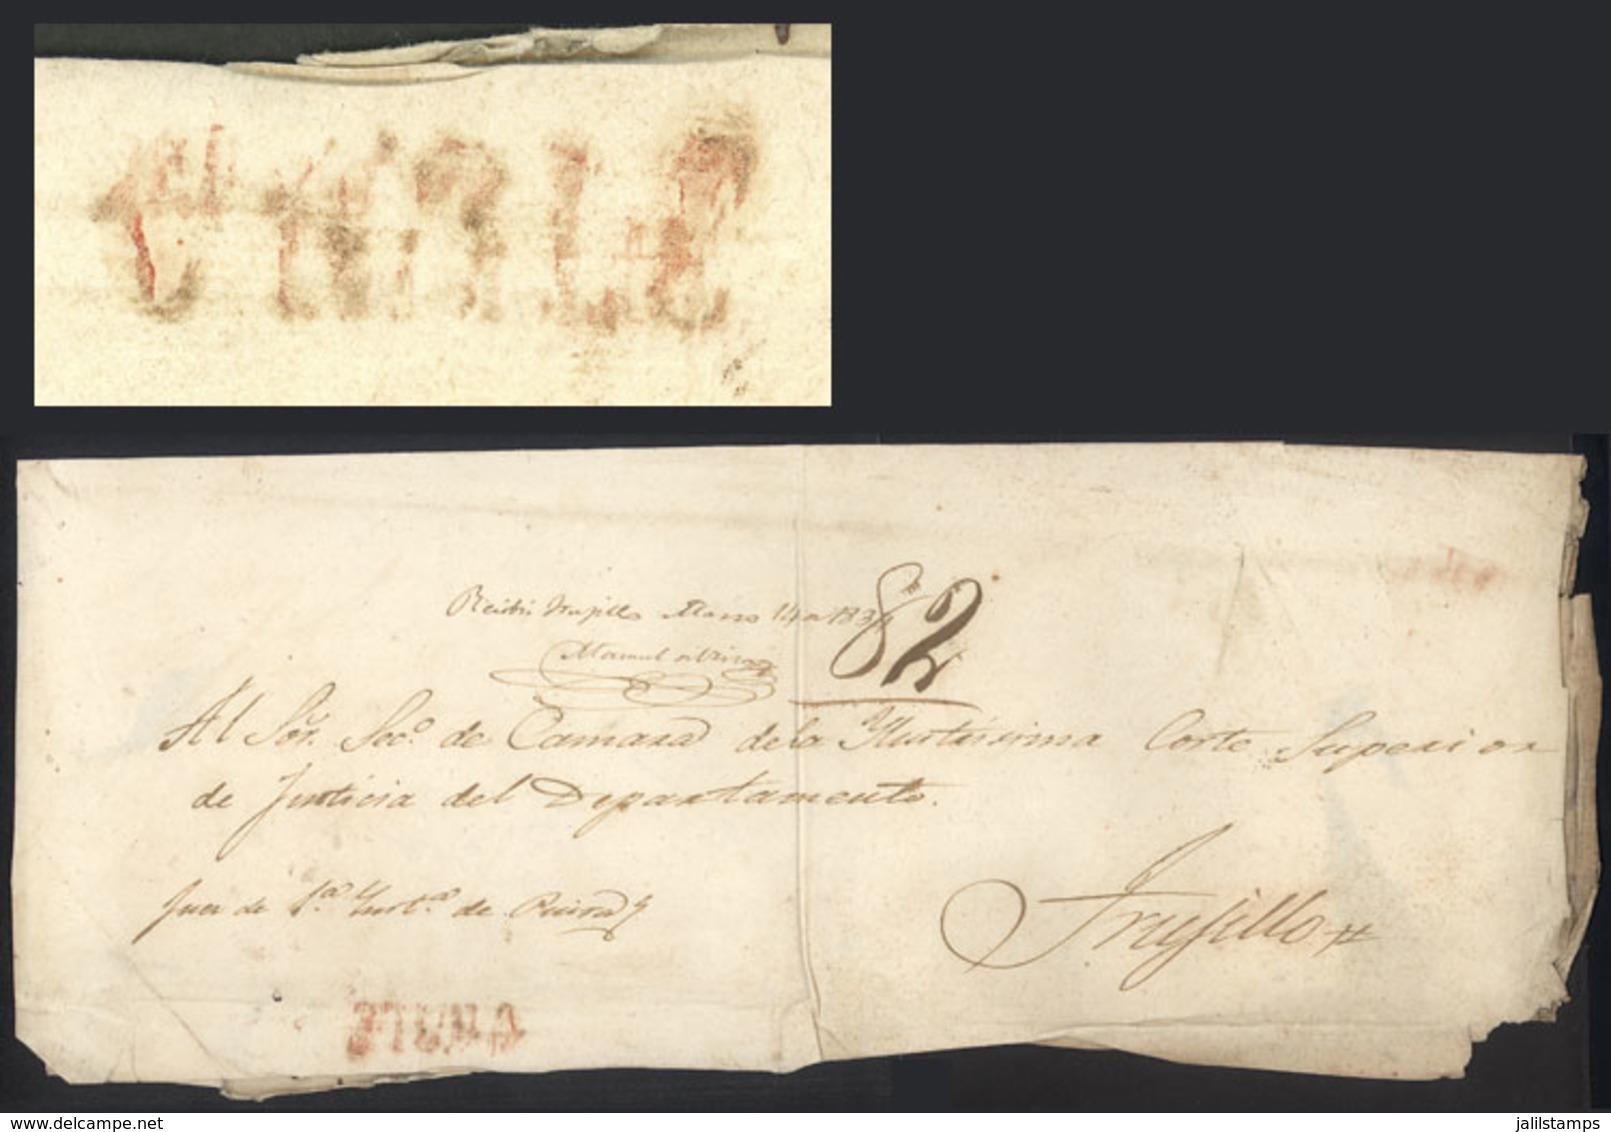 PERU: Large Official Folded Cover Dated 14/MAR/1834 Sent To Trujillo, With Large "82" Rating Along Red "PIURA" Mark, Int - Peru